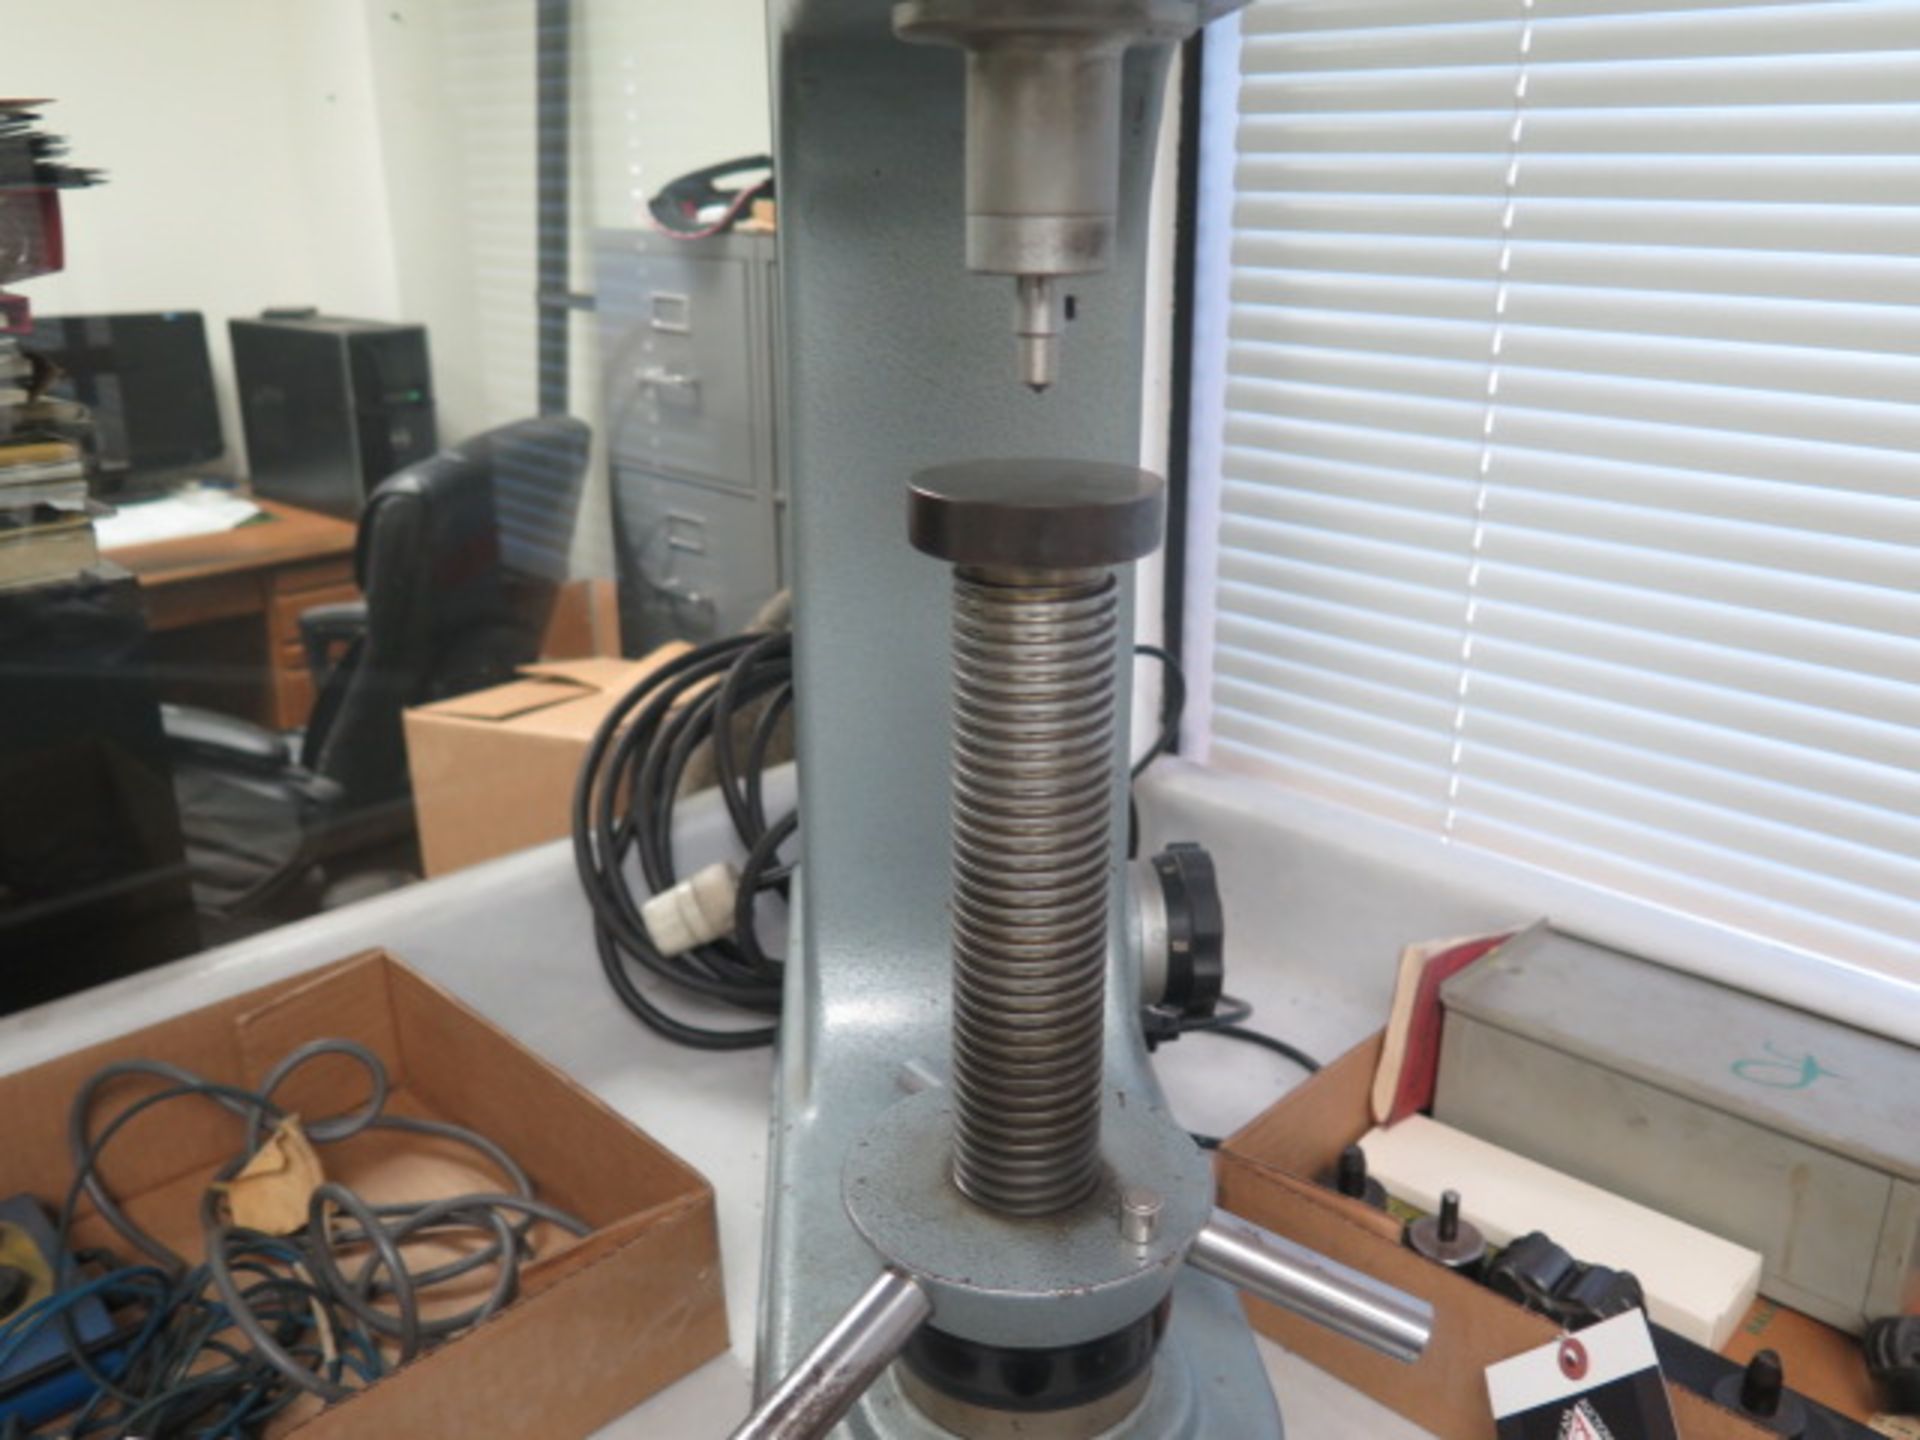 TMI Hardness Tester s/n 105876 w/ Accessories (SOLD AS-IS - NO WARRANTY) - Image 5 of 9